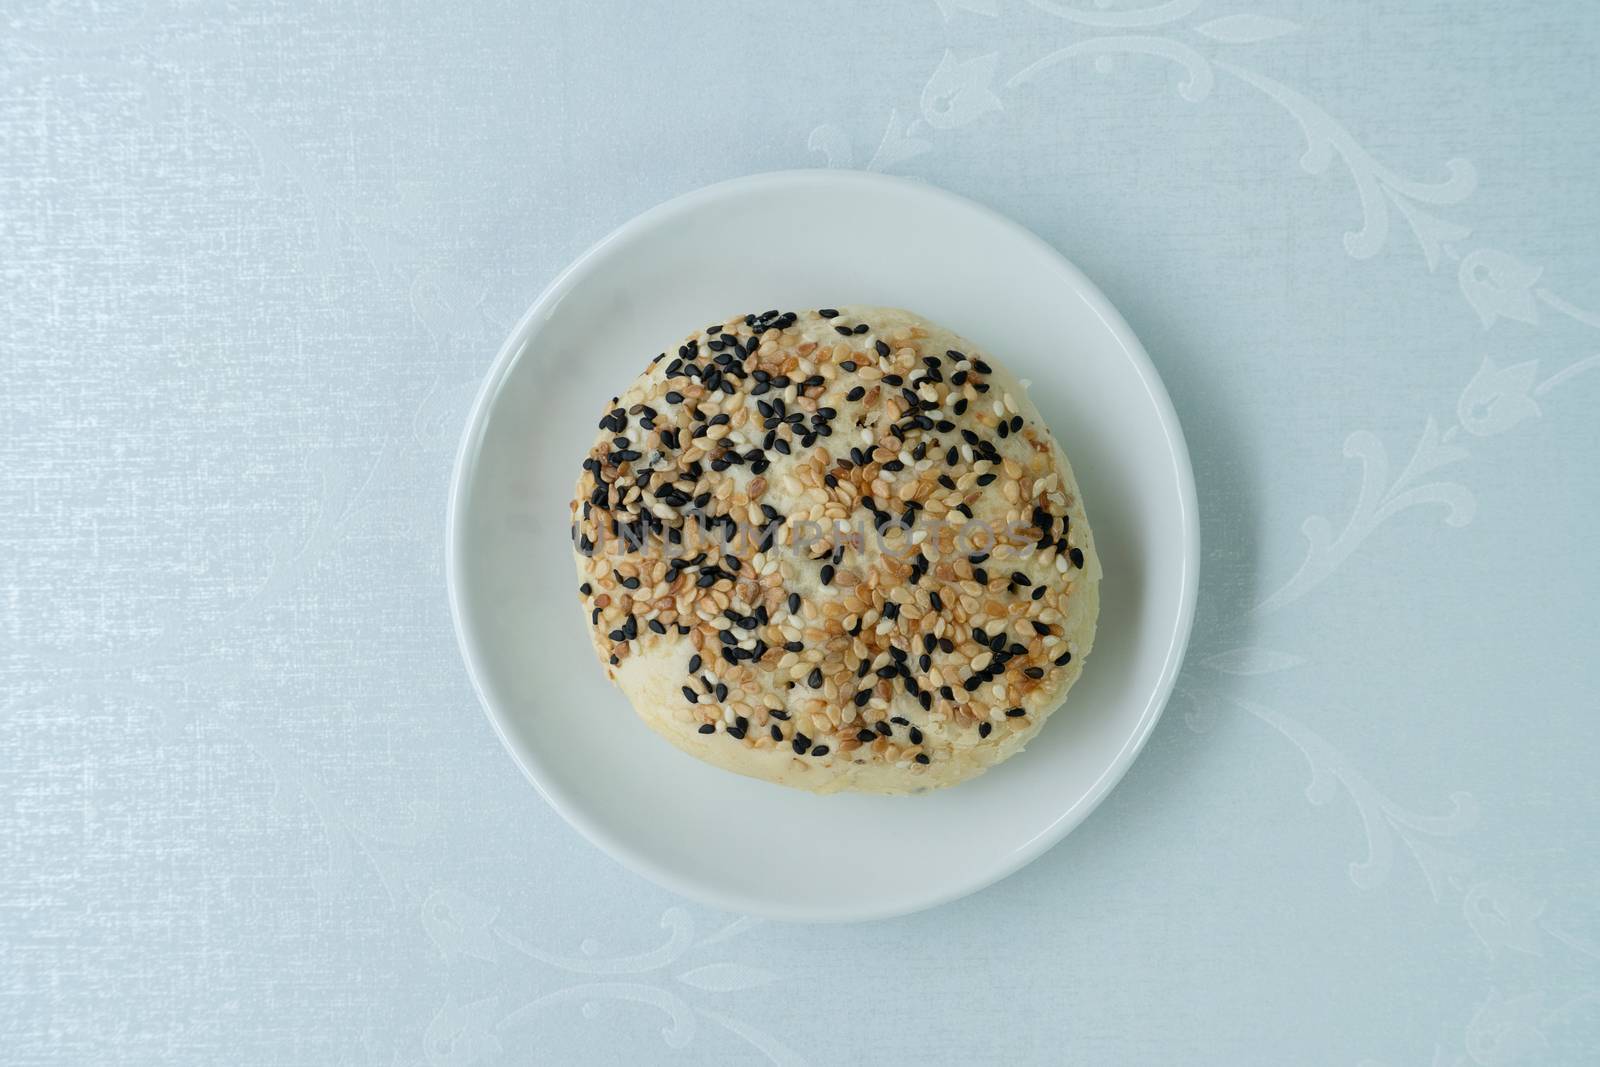 Chinese moon cake or pastry with sesame on top.